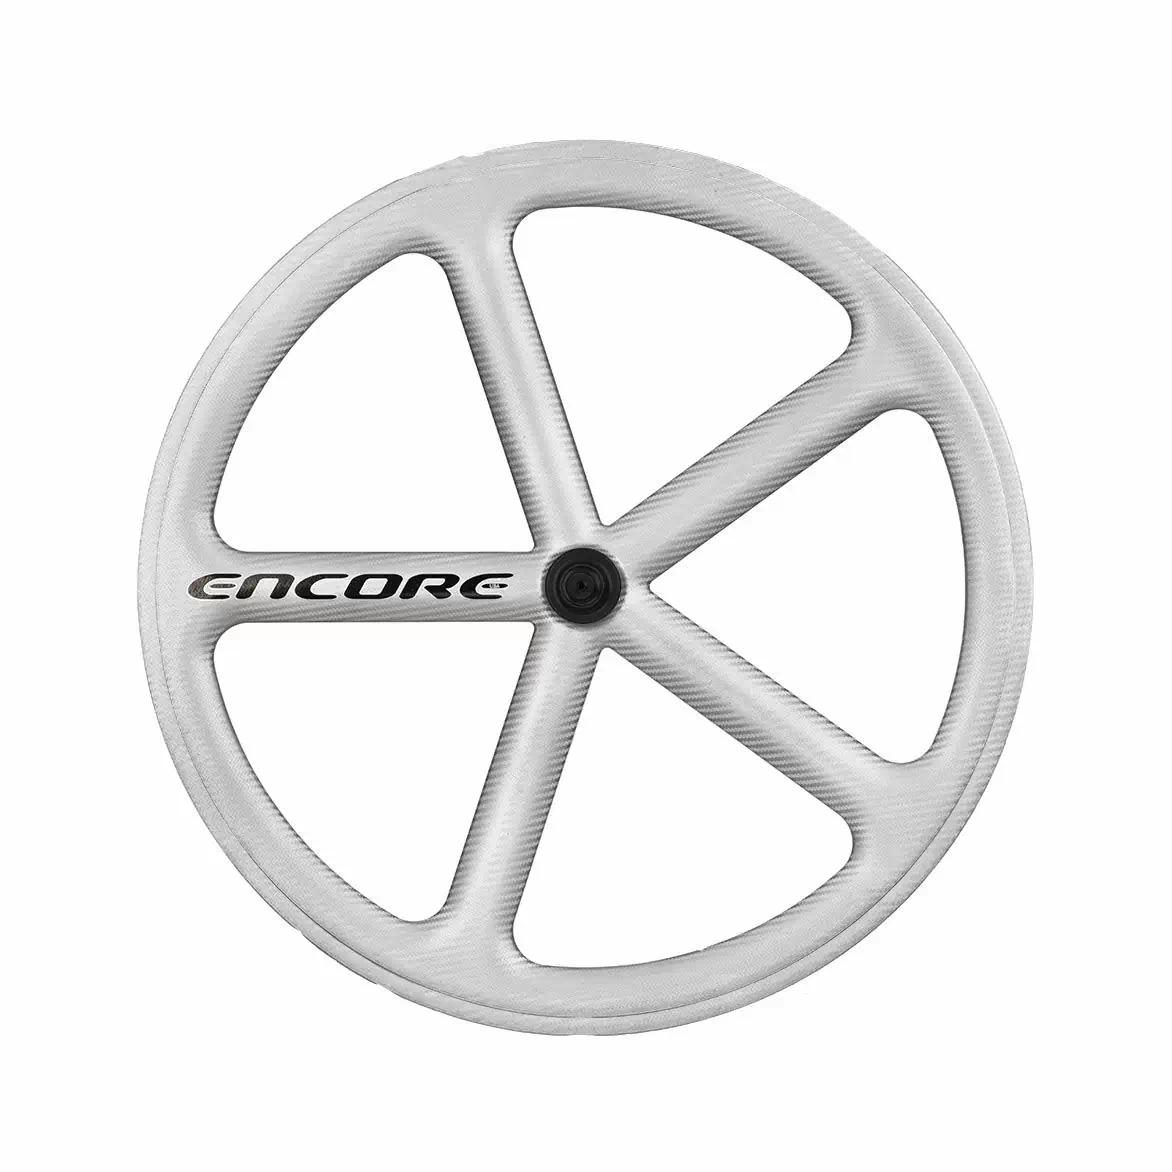 rear wheel 700c track 5 spokes carbon weave silver nmsw - image